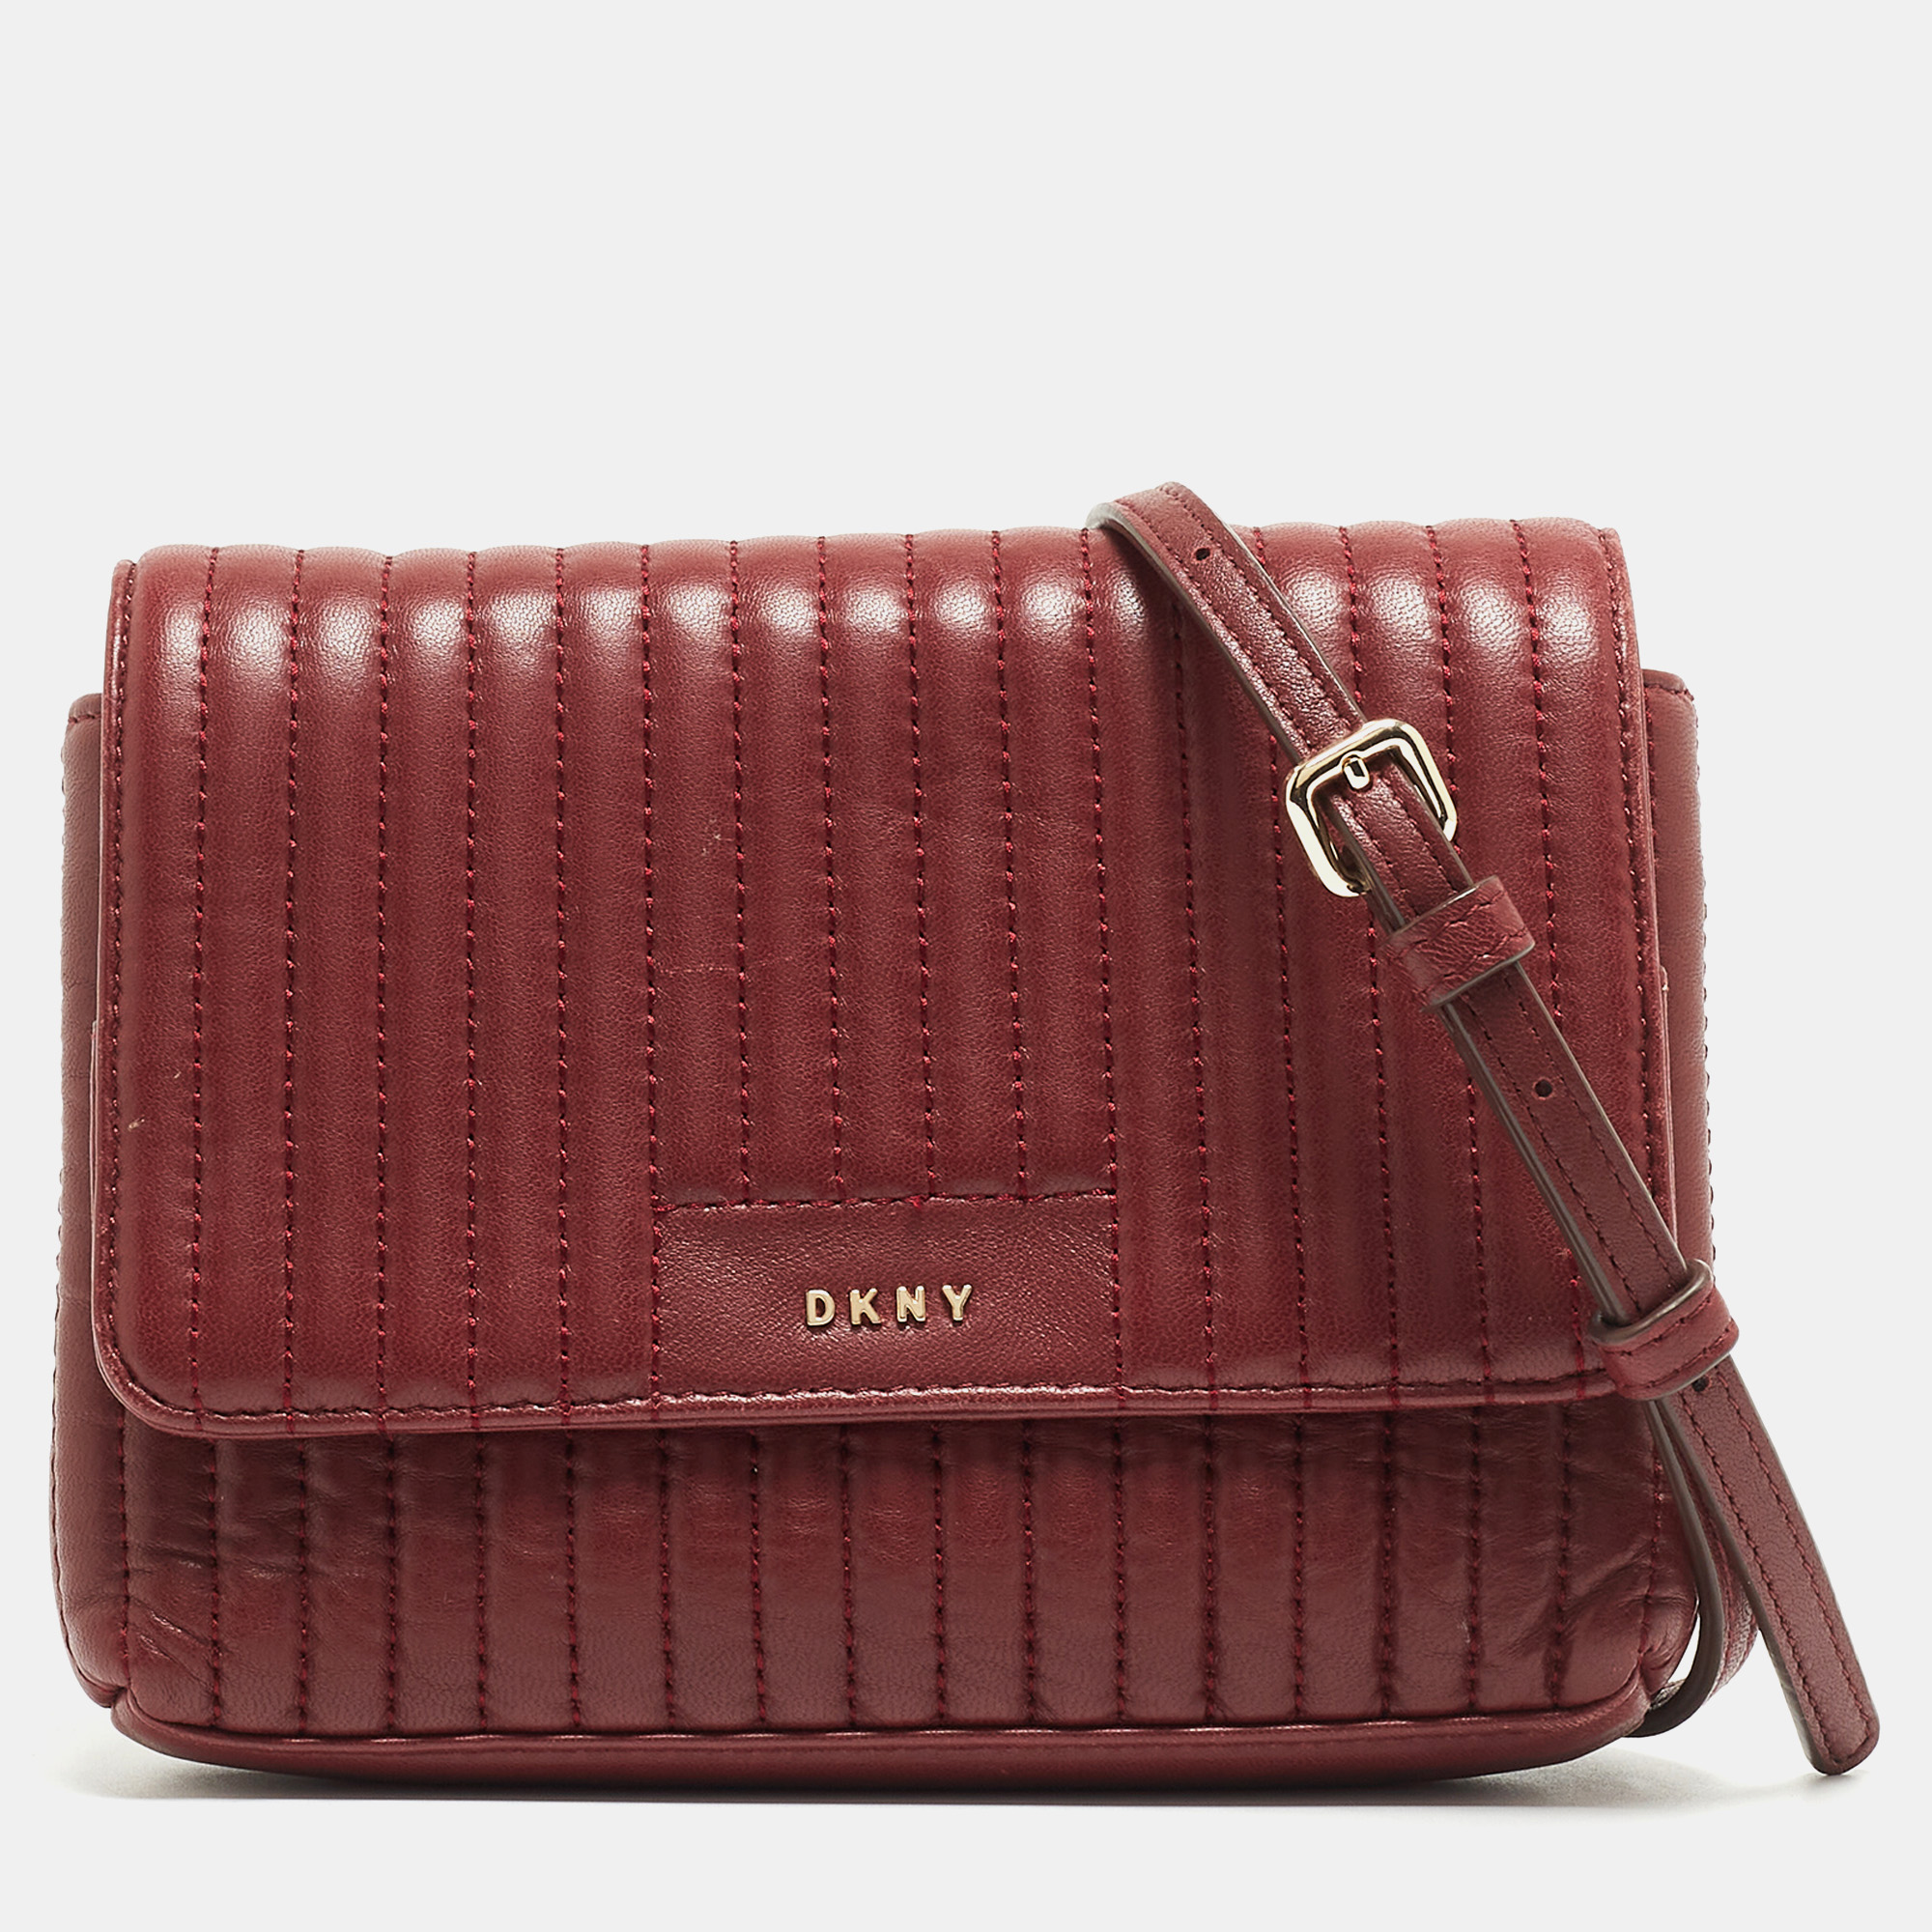 Pre-owned Dkny Burgundy Quilted Leather Gansevoort Crossbody Bag